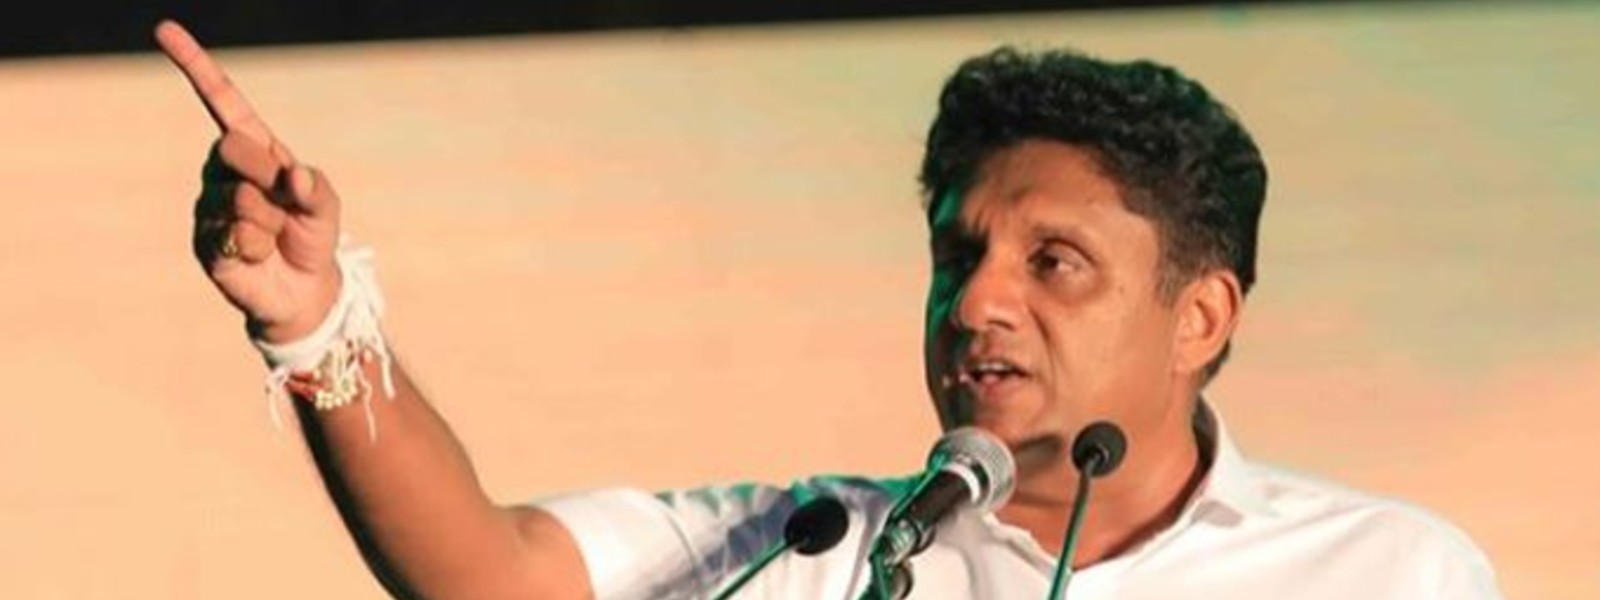 Lethargic government attitude not needed, says Sajith